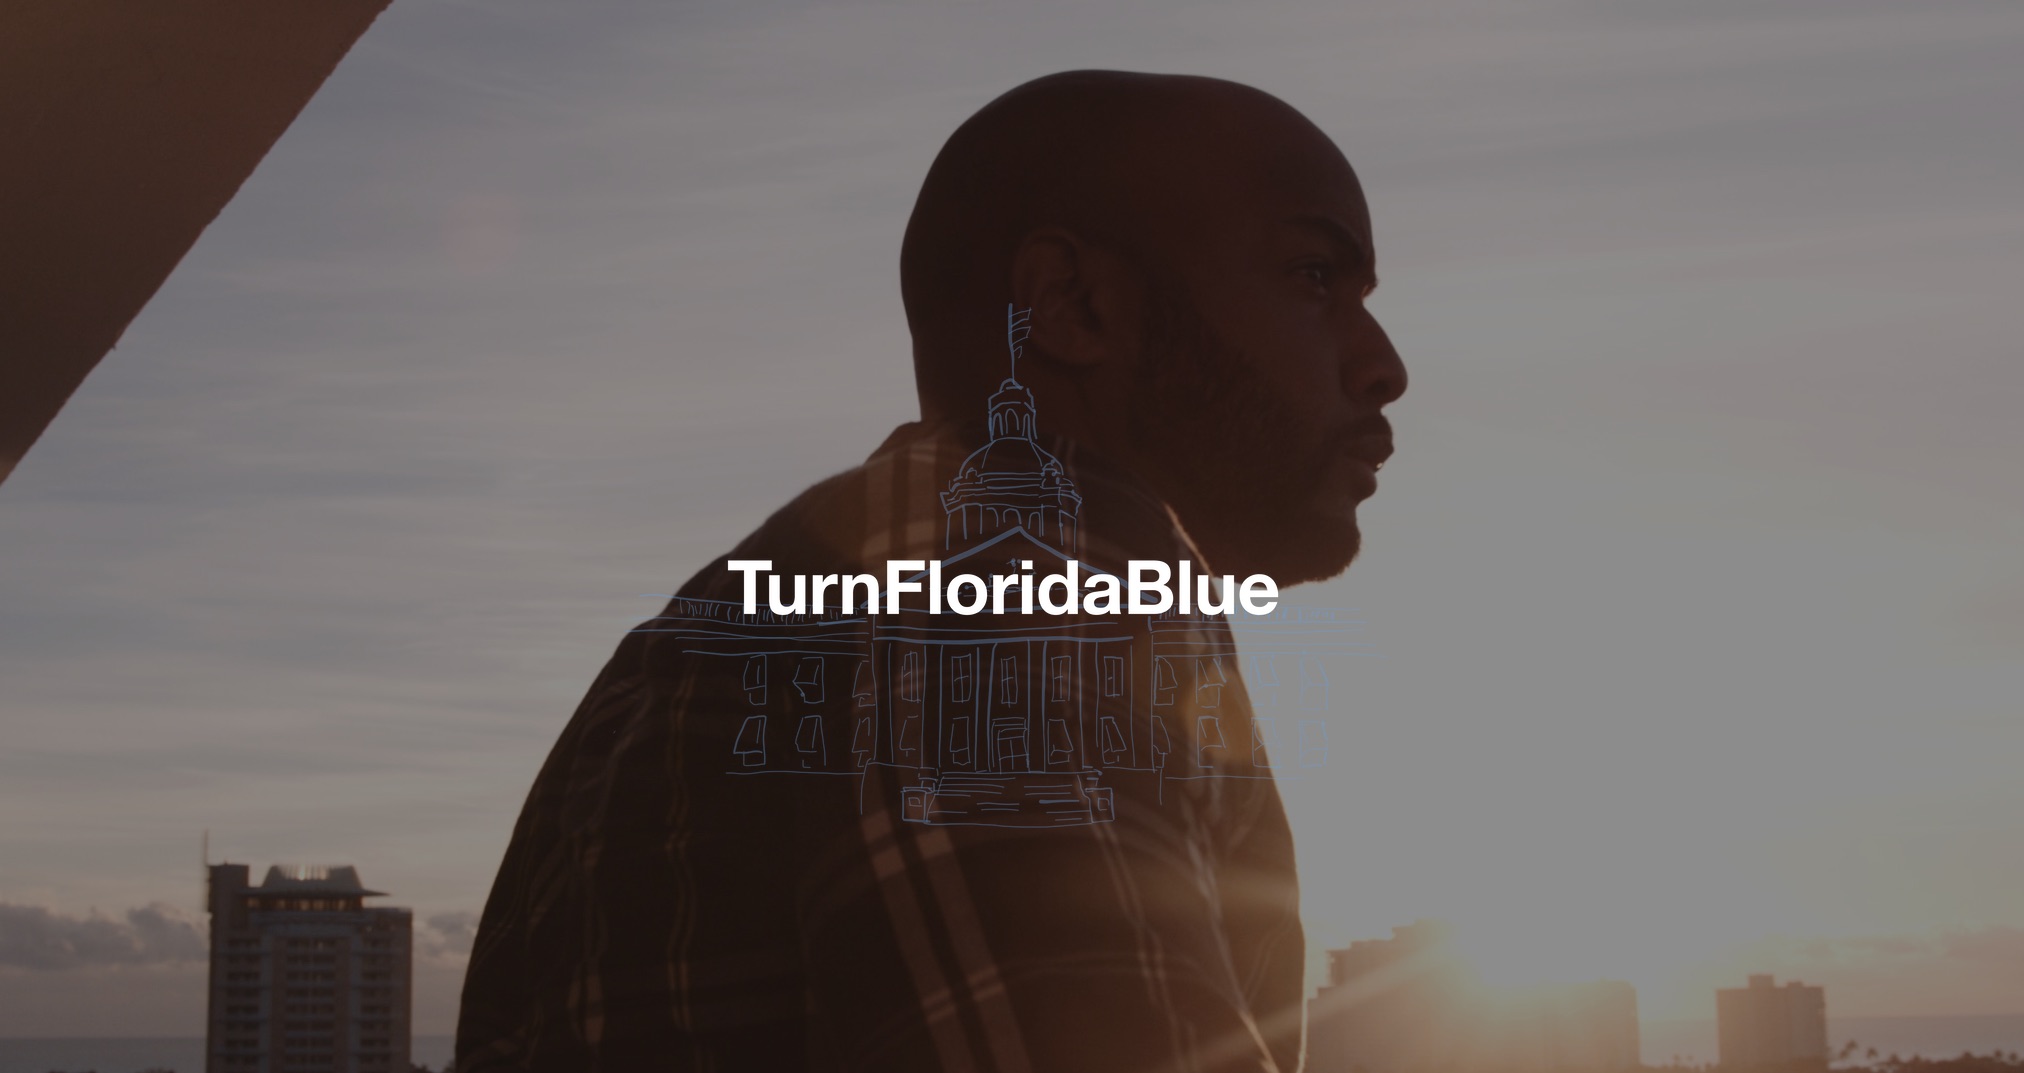 Florida House Victory Campaign White and blue Turn Florida Blue logo on backdrop of side profile of man wearing flannel shirt with the setting sun behind him